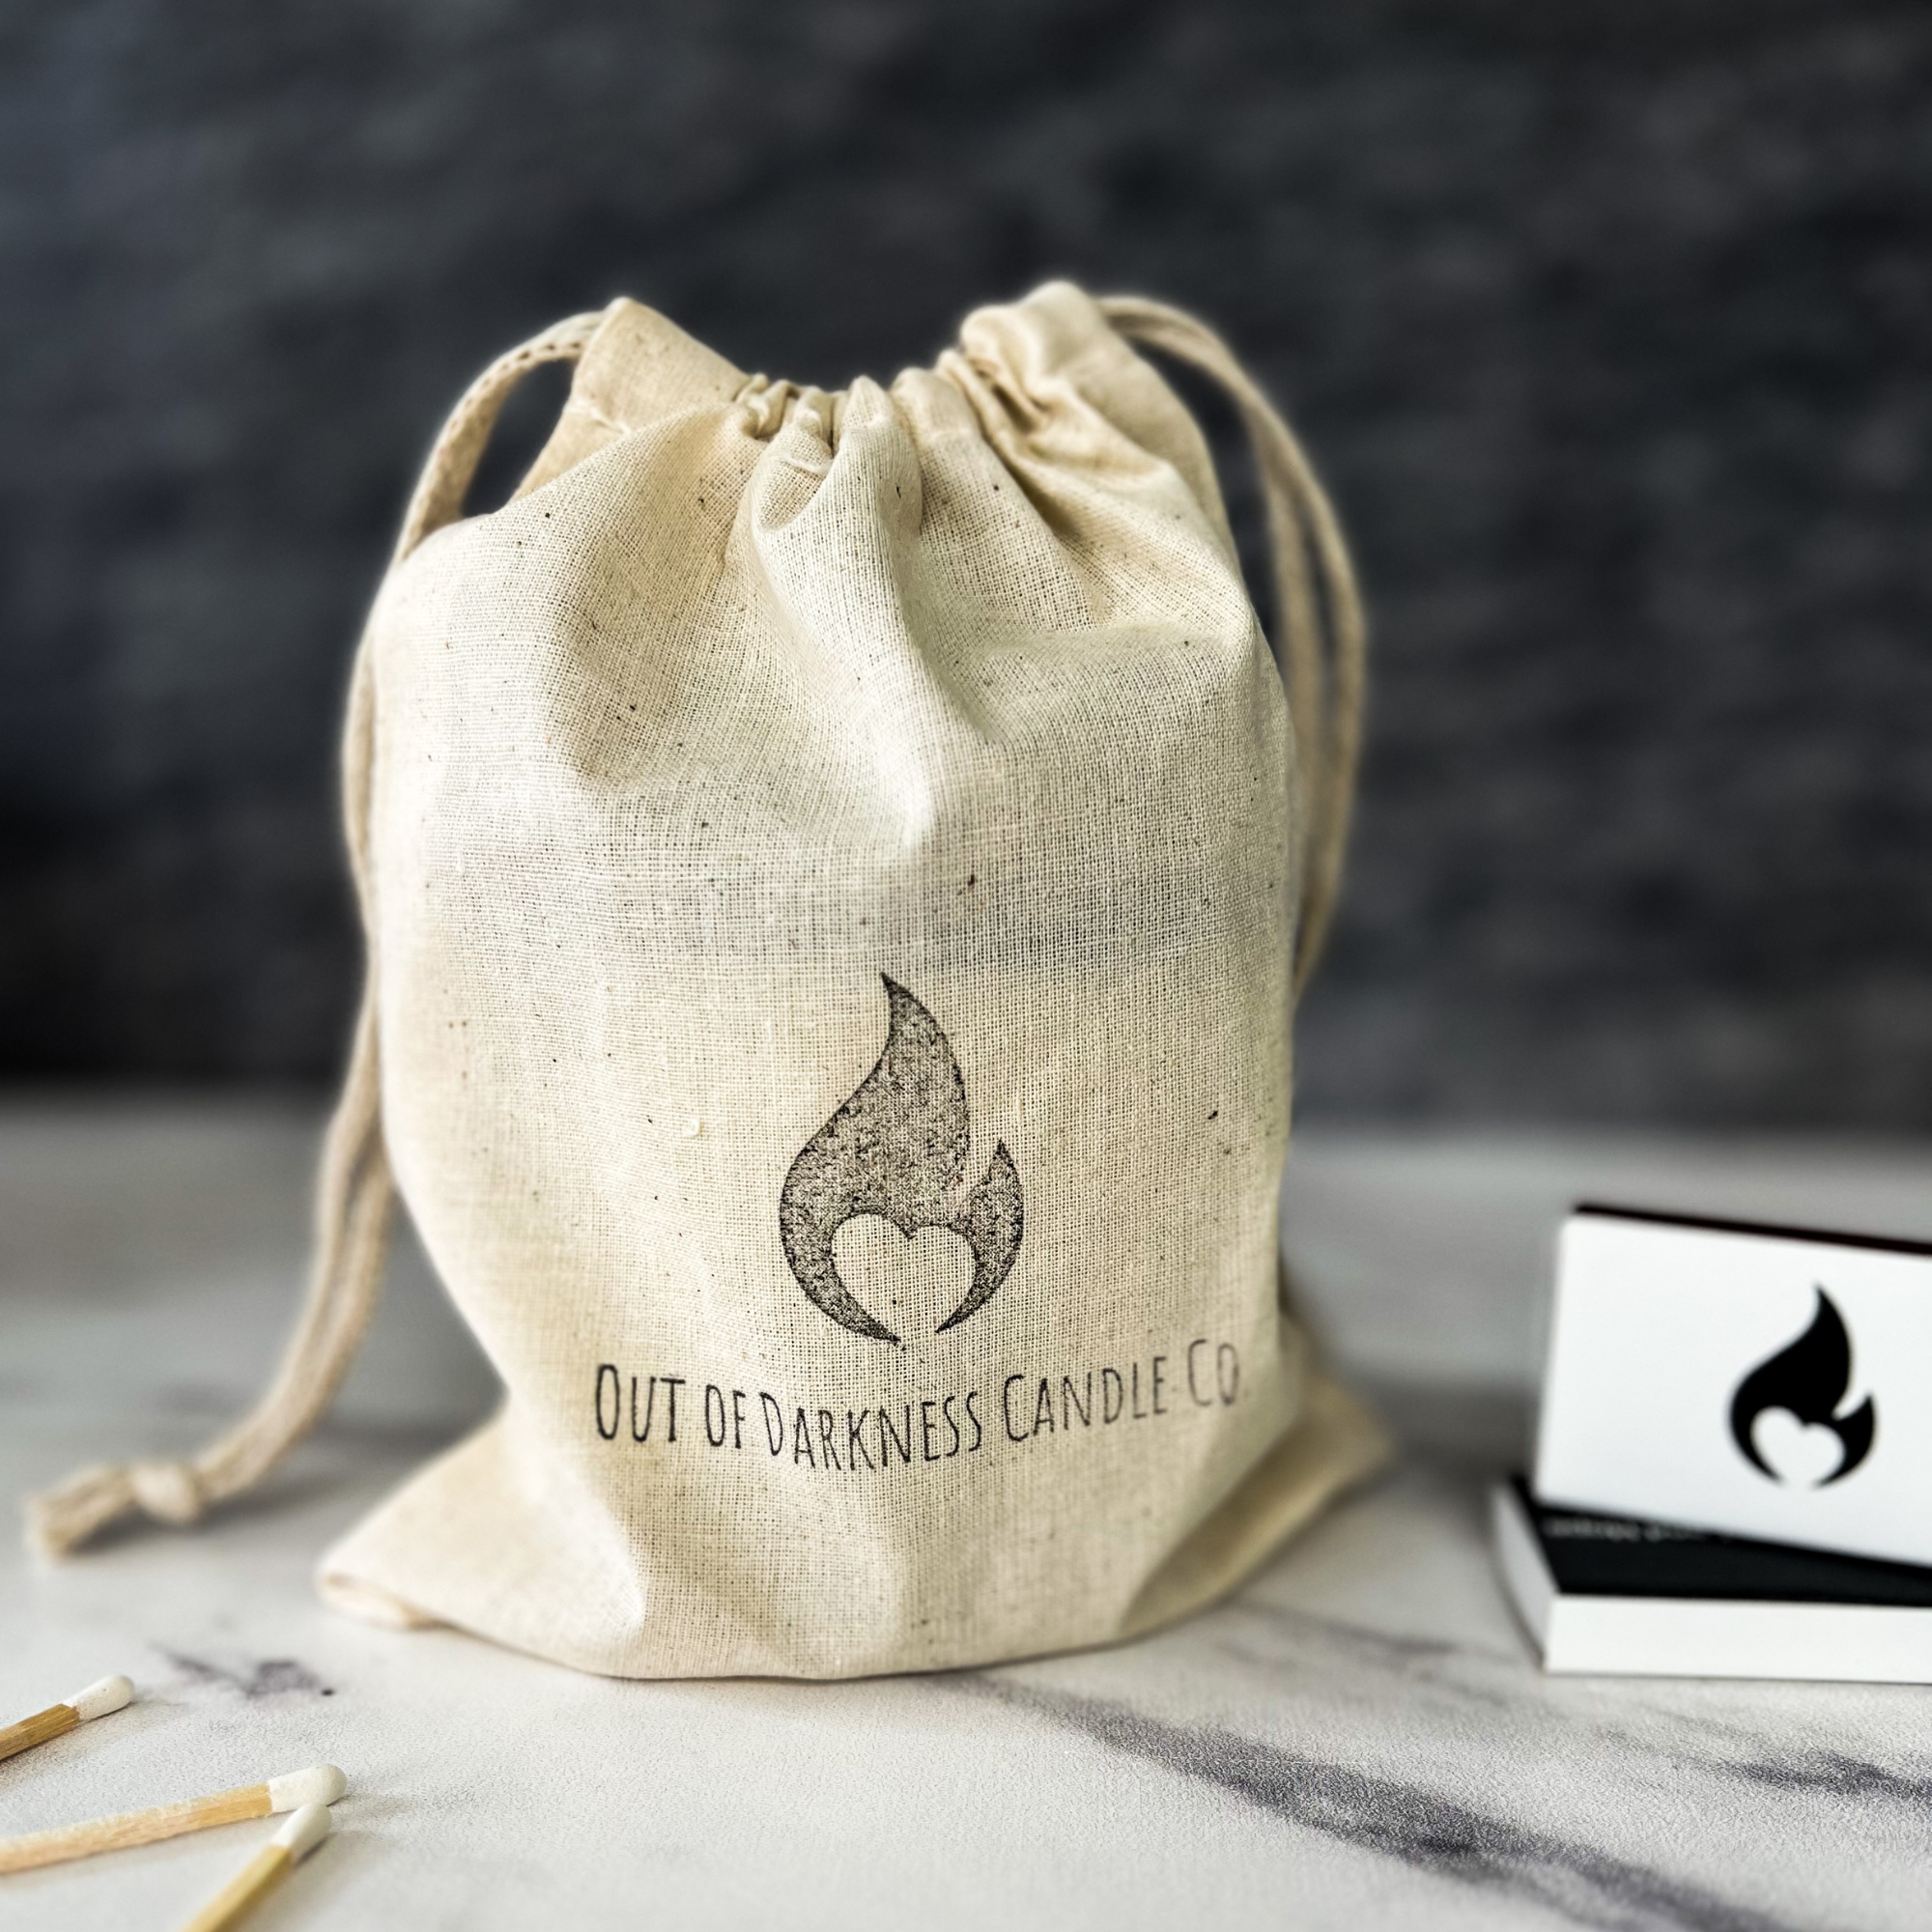 Off White Muslin Bag that says Out of Darkness Candle Co and has the company flame logo on top of that- next to the bag are a book of wooden matches